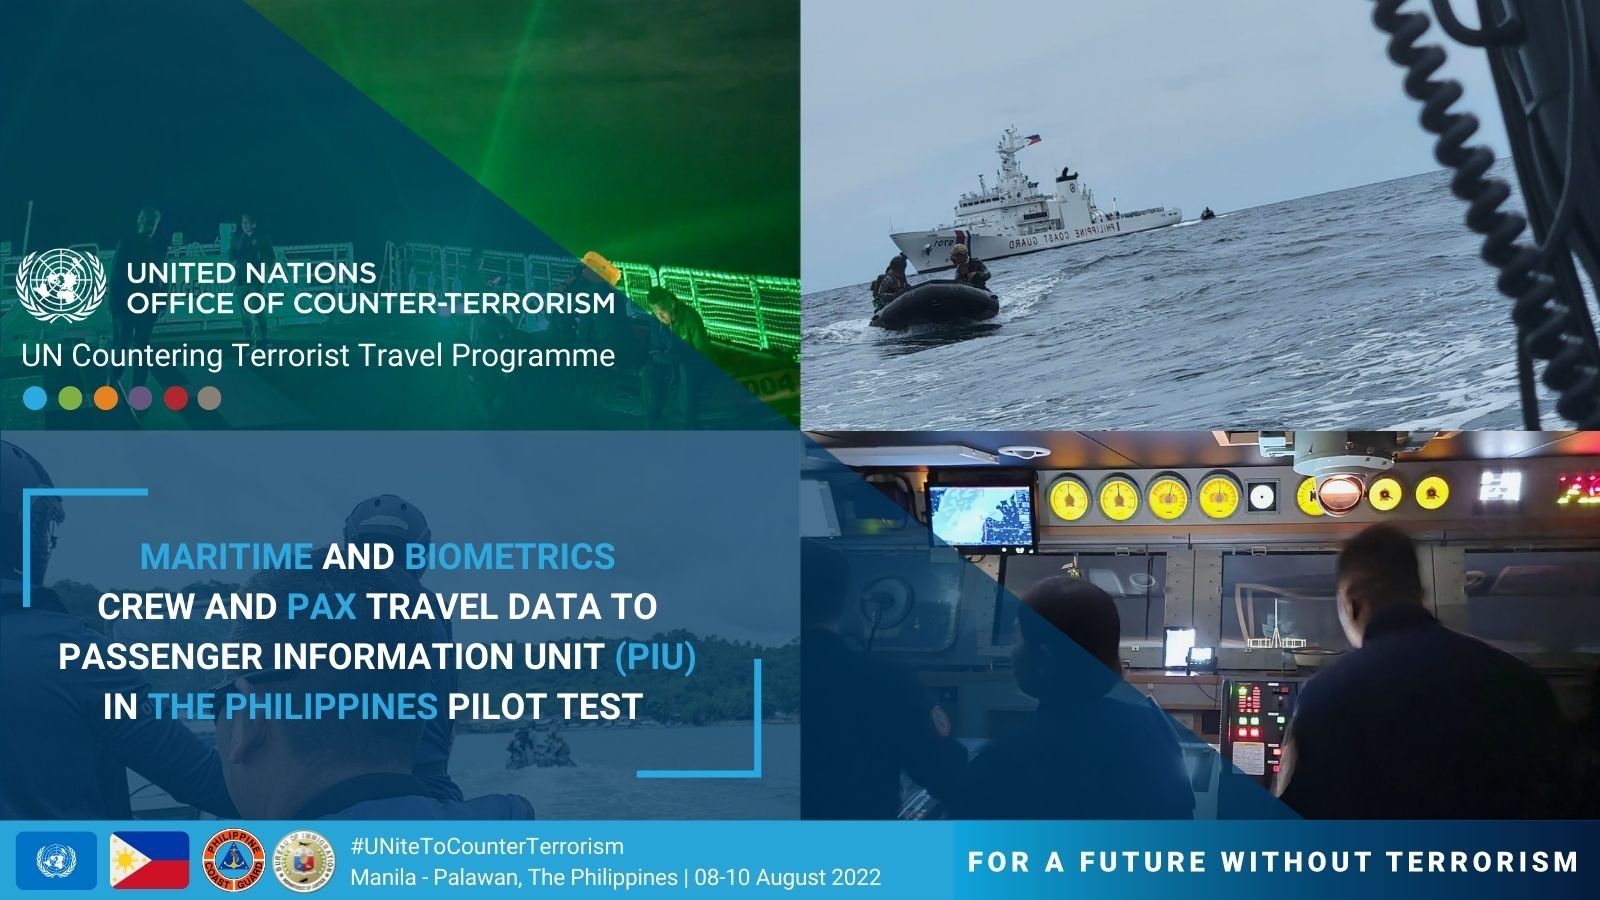 countering_terrorist_travel_programme_and_the_philippines_maritime_pilot_test_-_unoct_by_antoine_andary.jpg